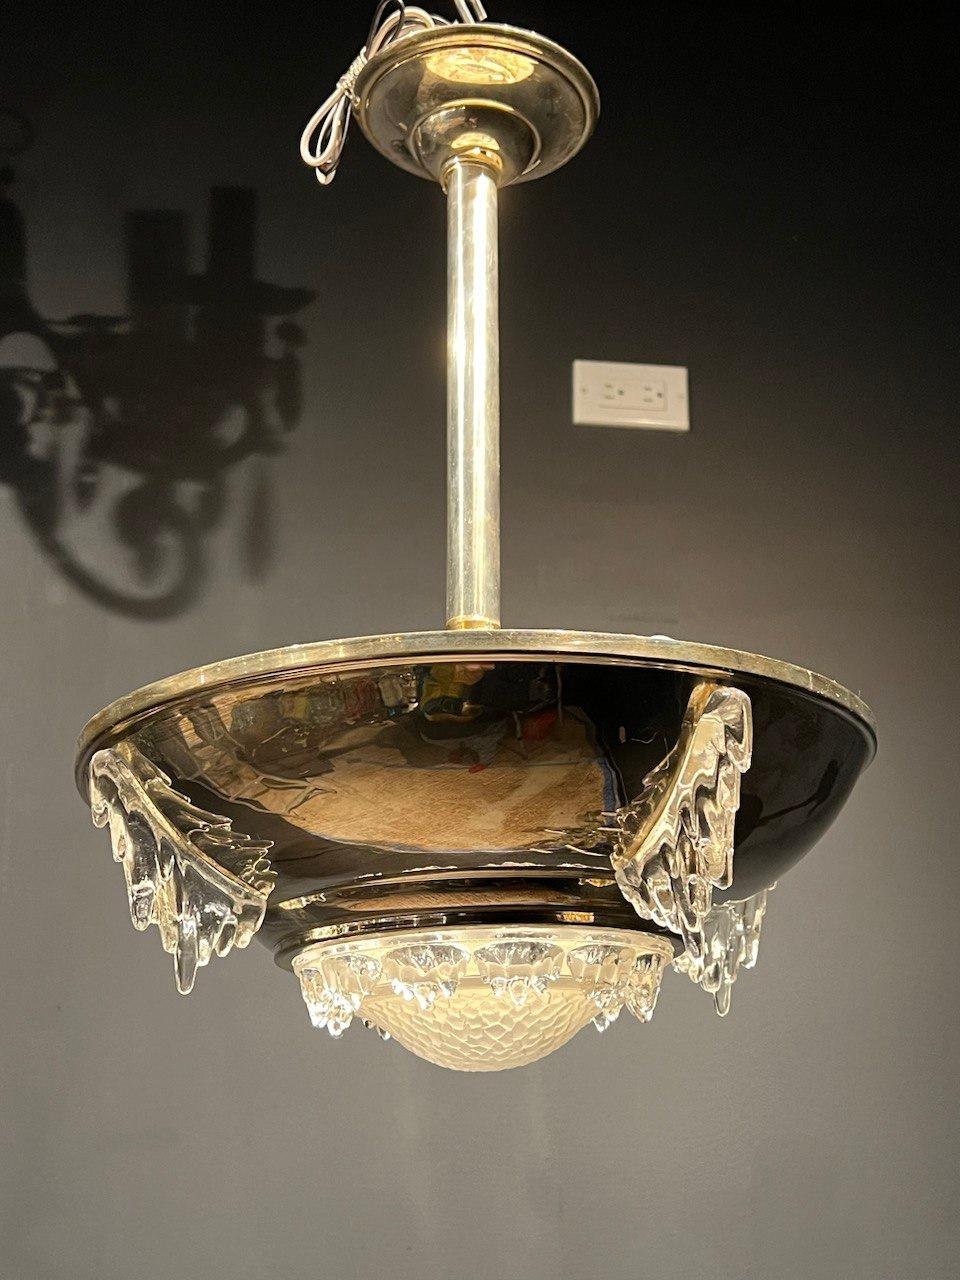 Mid-20th Century 1930's French Silver Plated Light Fixture by Ezan designer  For Sale